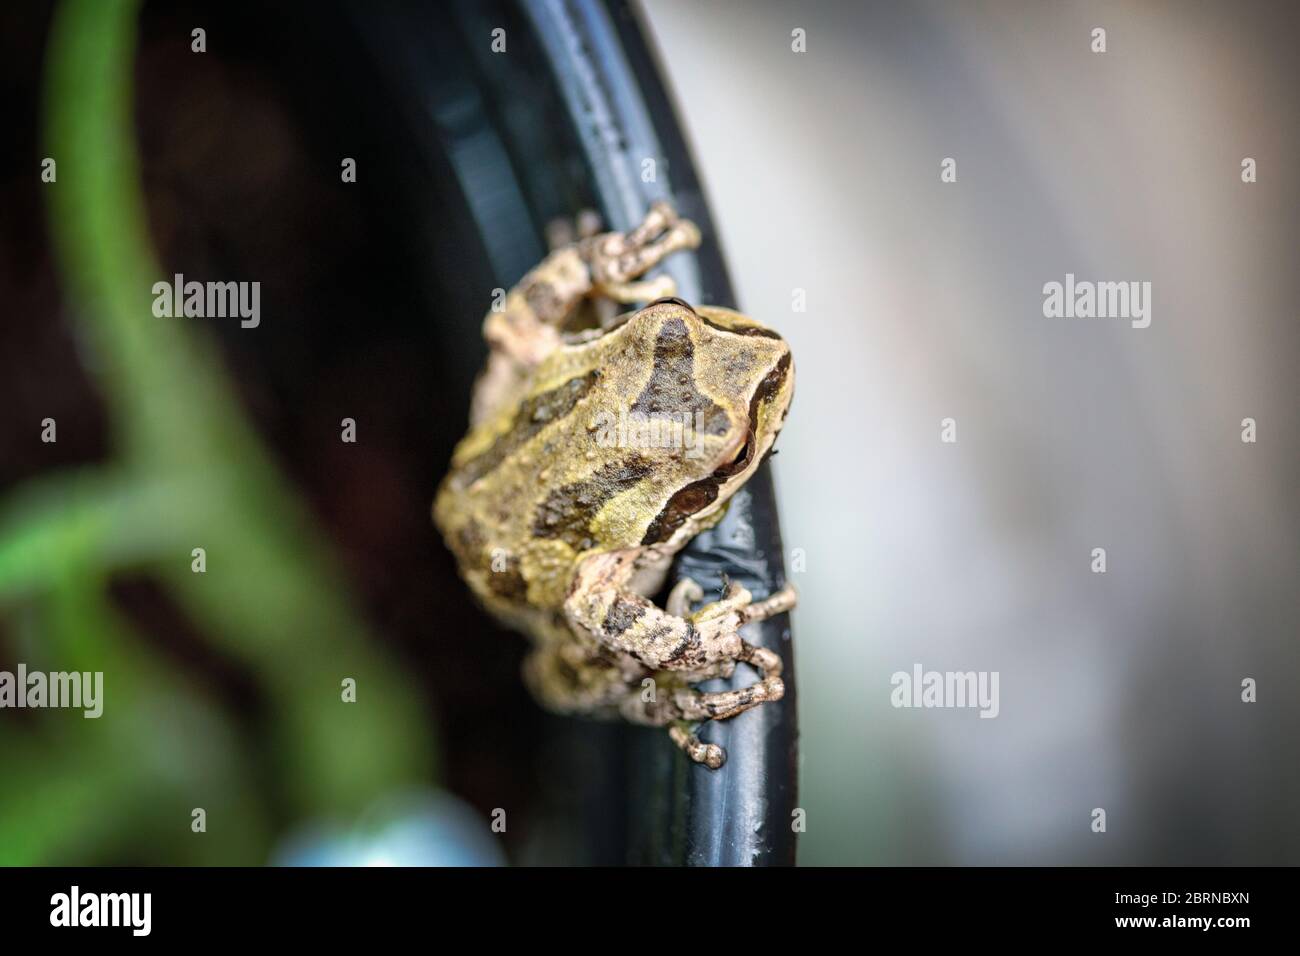 The Pacific tree frog (Pseudacris regilla), also known as the Pacific chorus frog, in San Jose, California Stock Photo